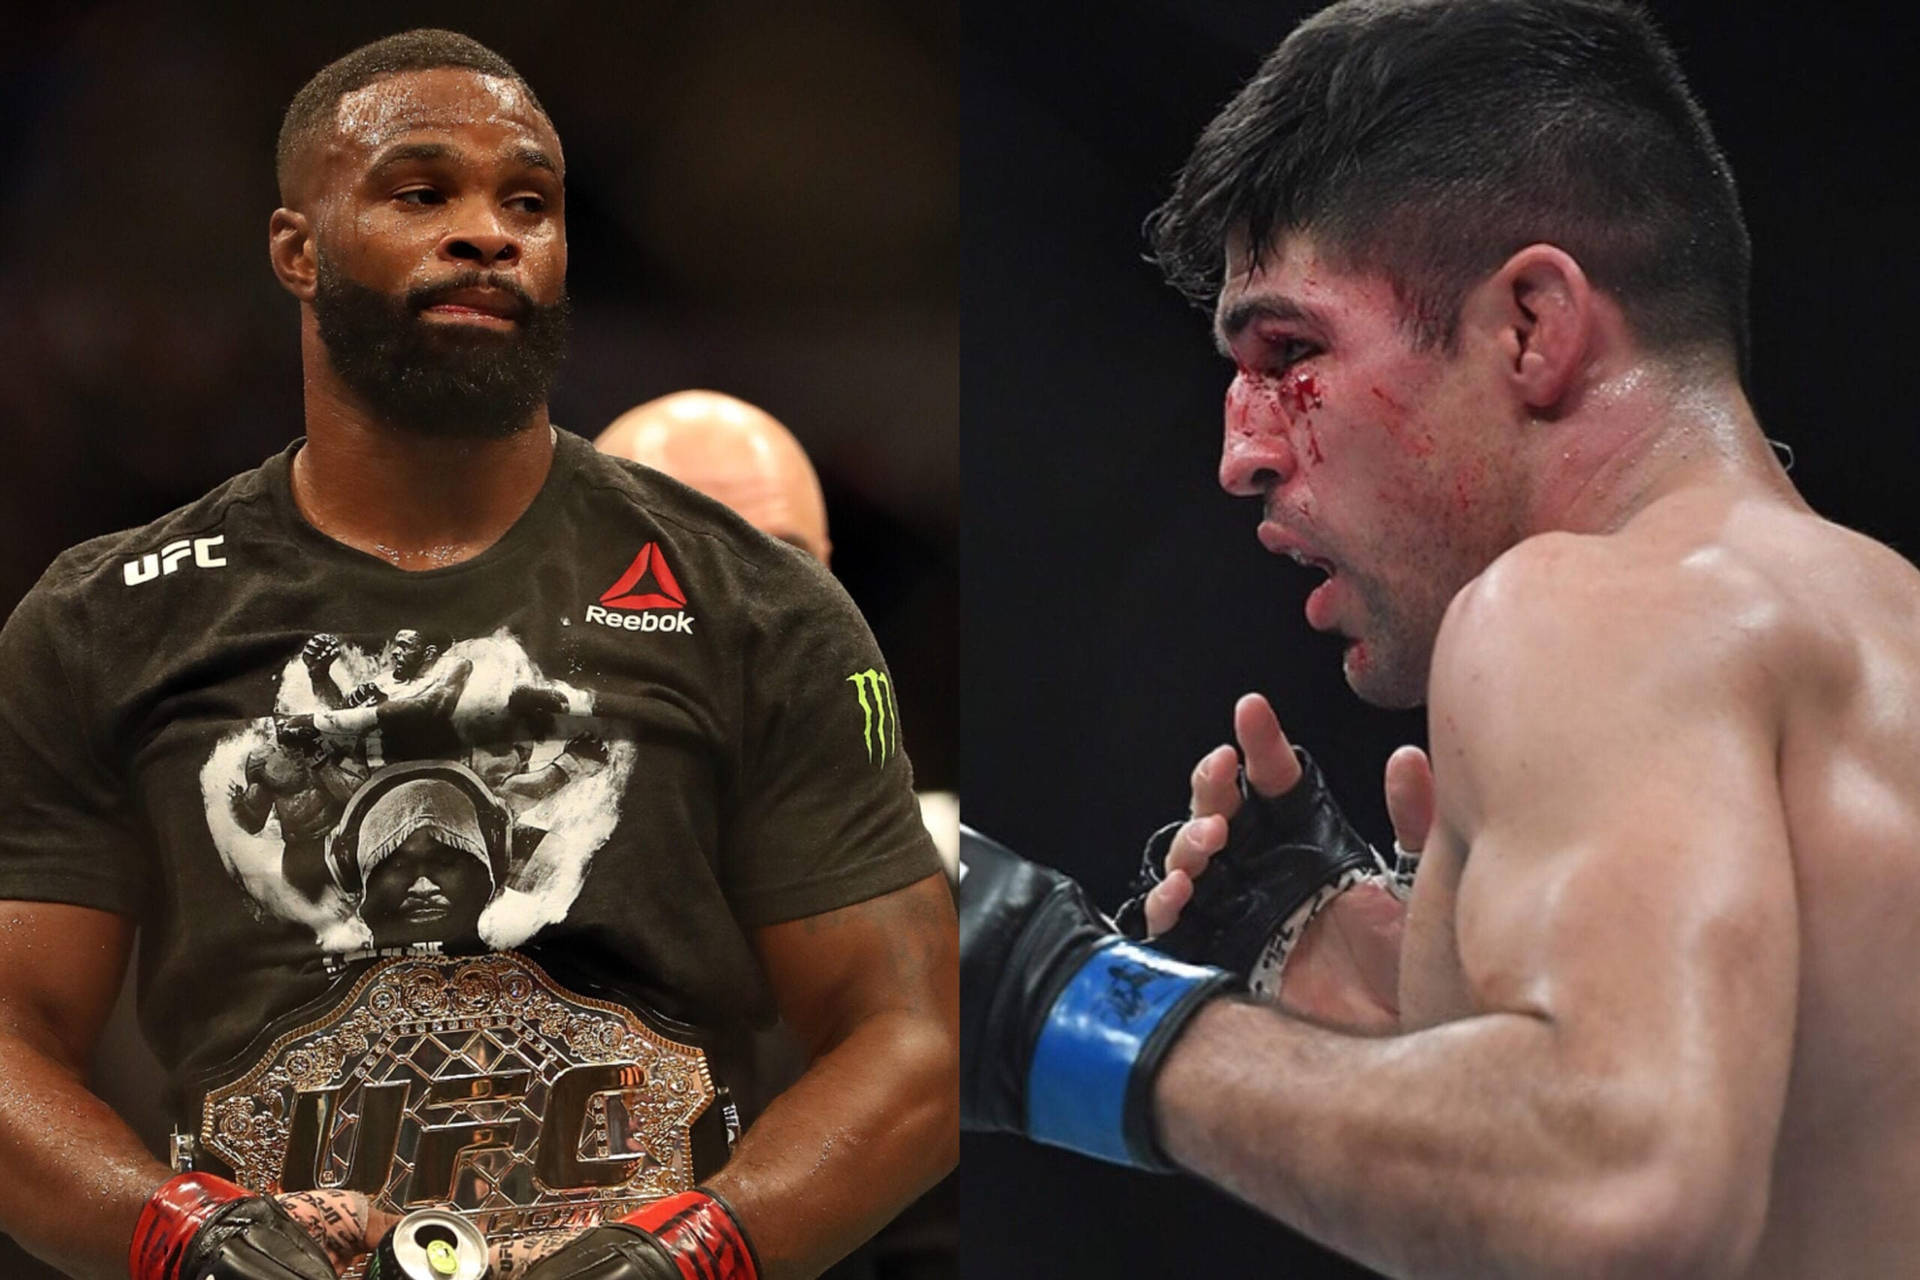 Vicente Luque lands a punch on Tyron Woodley during a high-stakes fight. Wallpaper